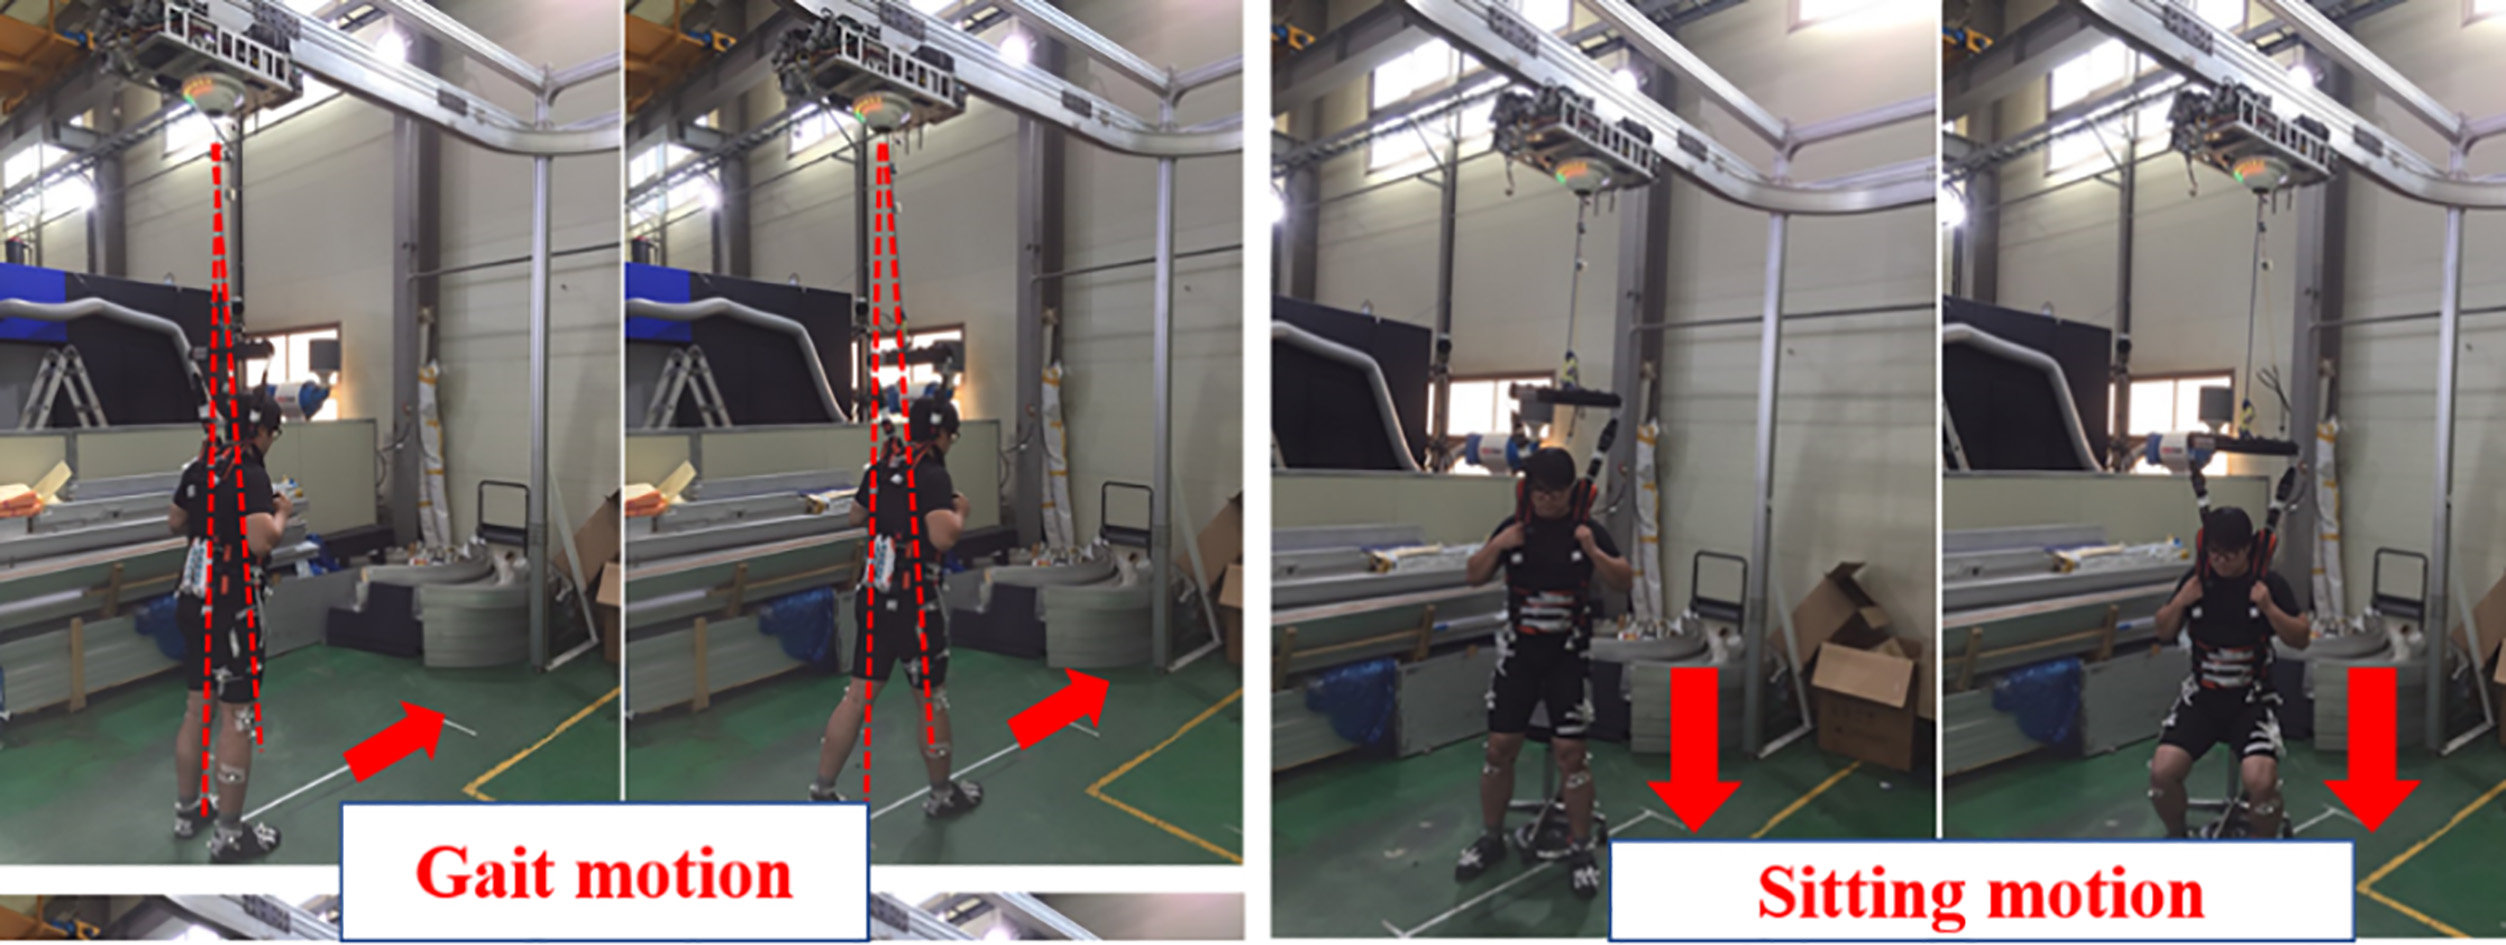 Apparatus of the gait and sitting motion using the motion detection function of the rehabilitation training system.